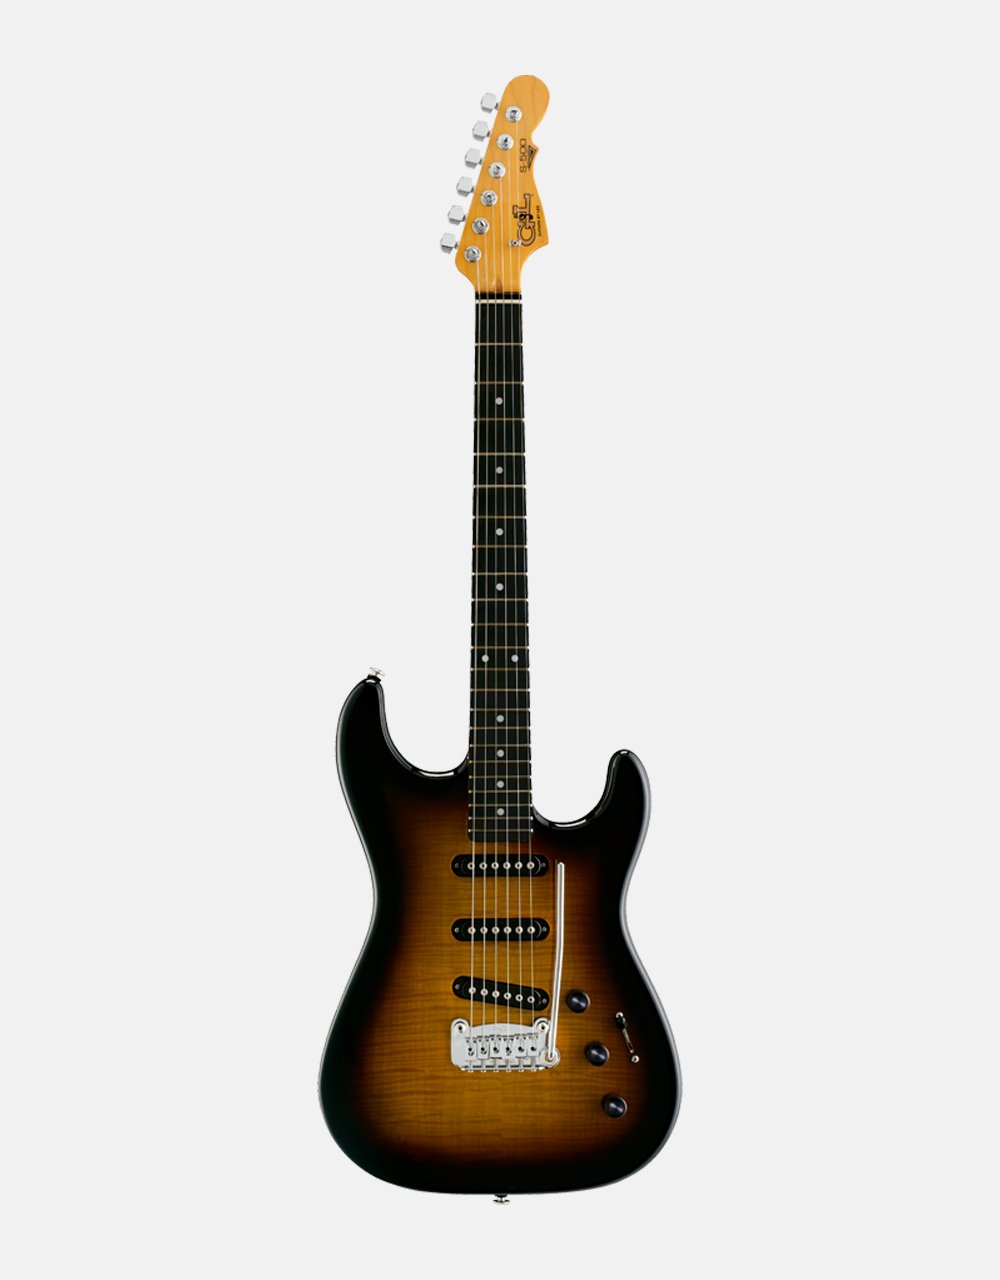 Build To Order Guitars | Product categories | G&L Musical Instruments